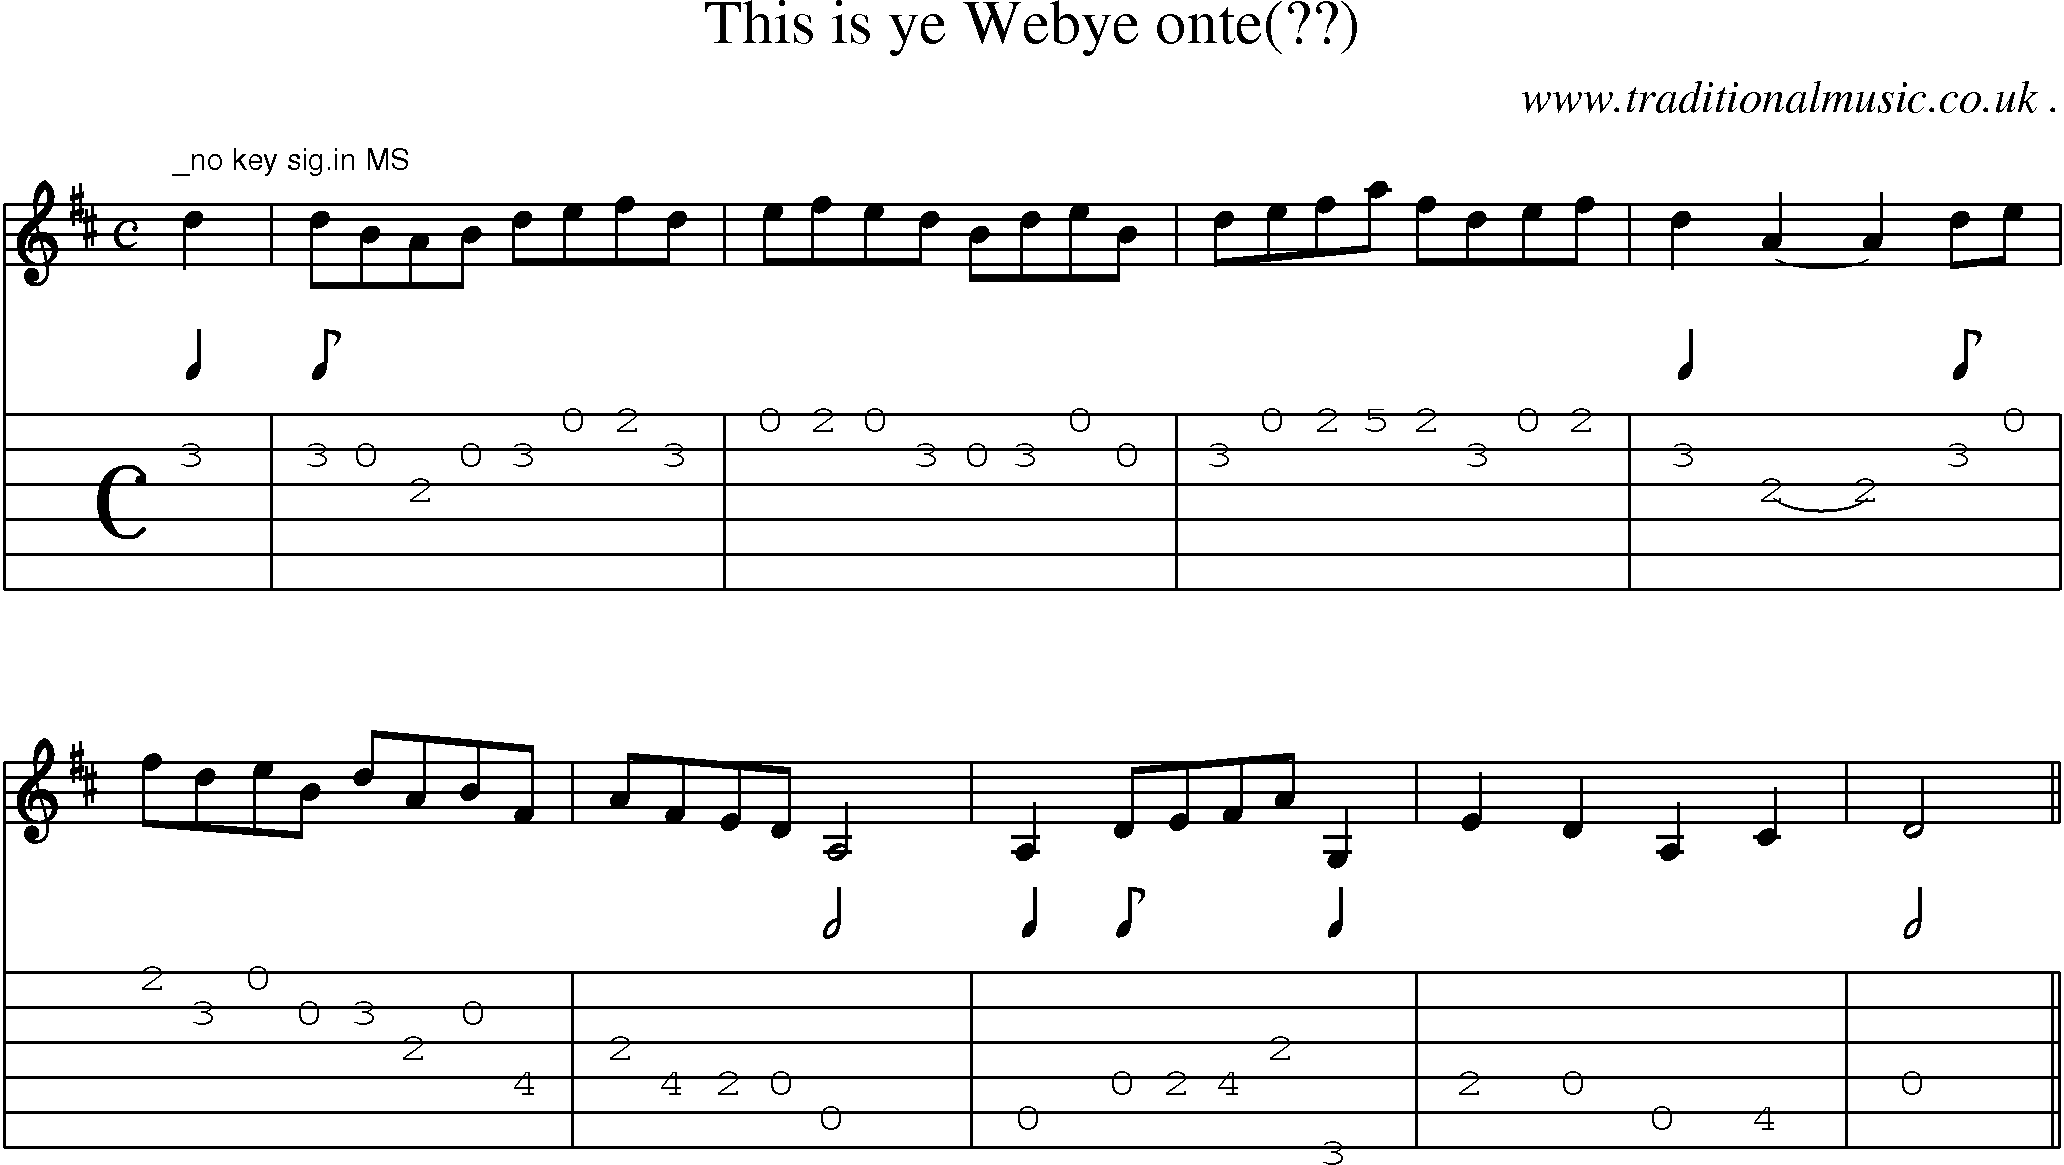 Sheet-Music and Guitar Tabs for This Is Ye Webye Onte